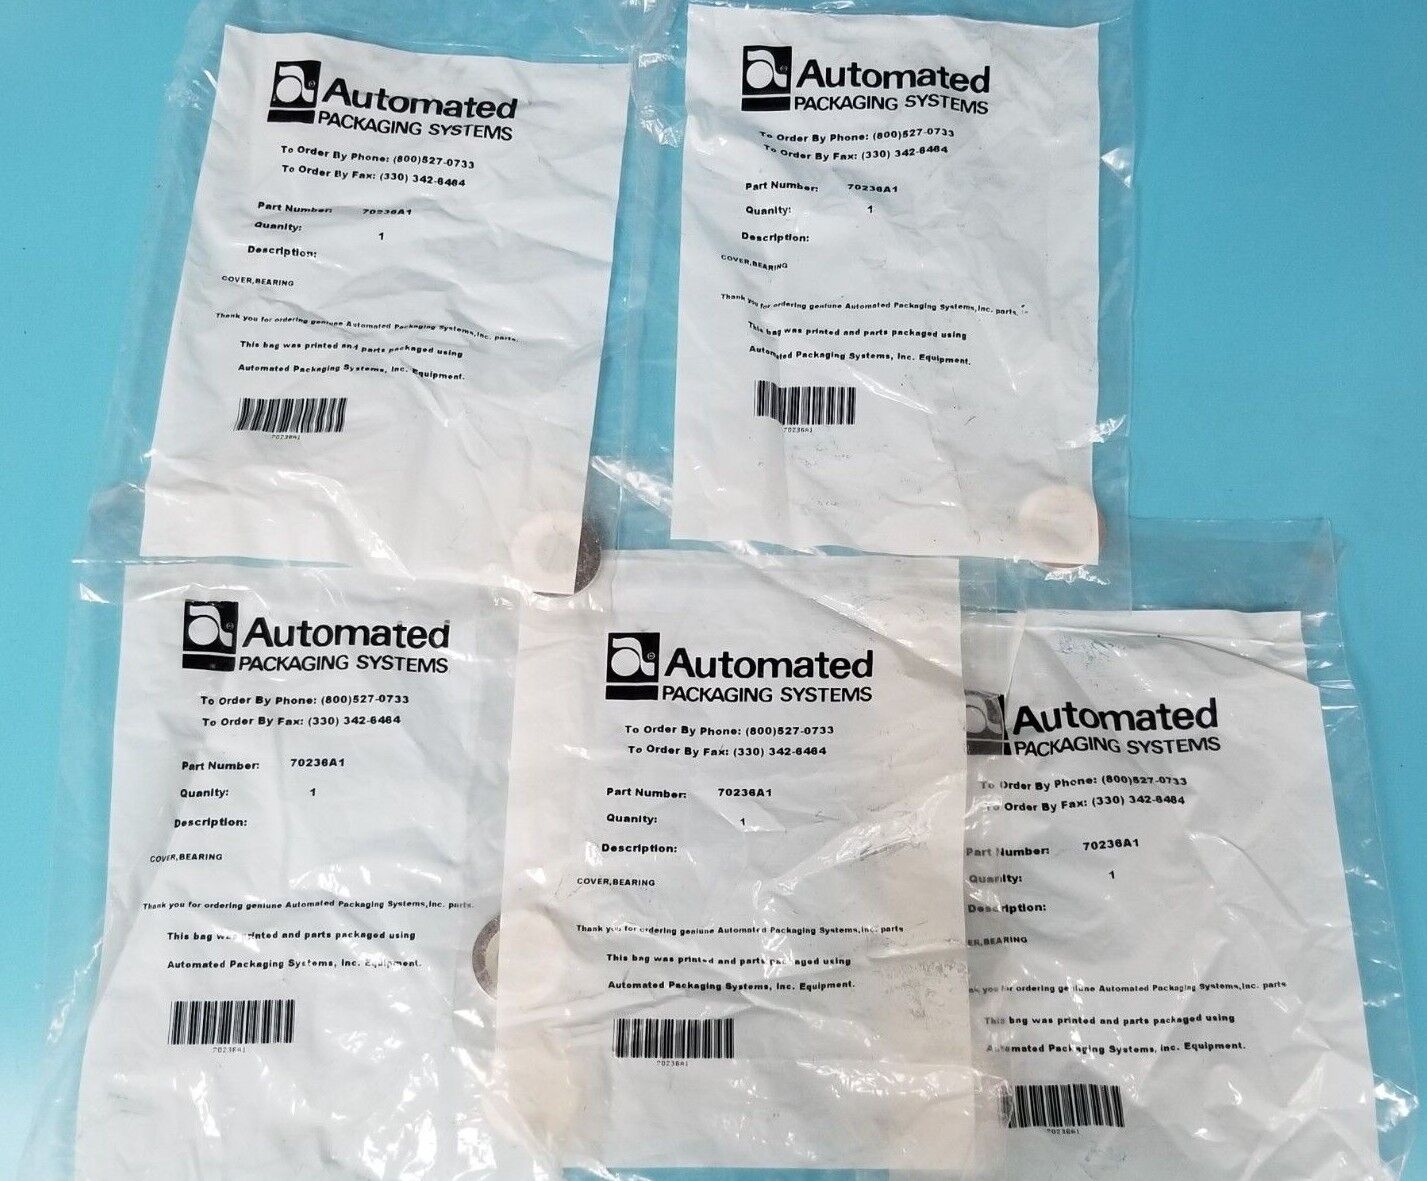 LOT OF 5 NEW AUTOMATED PACKAGING SYSTEMS 70236A1 COVERS / BEARING